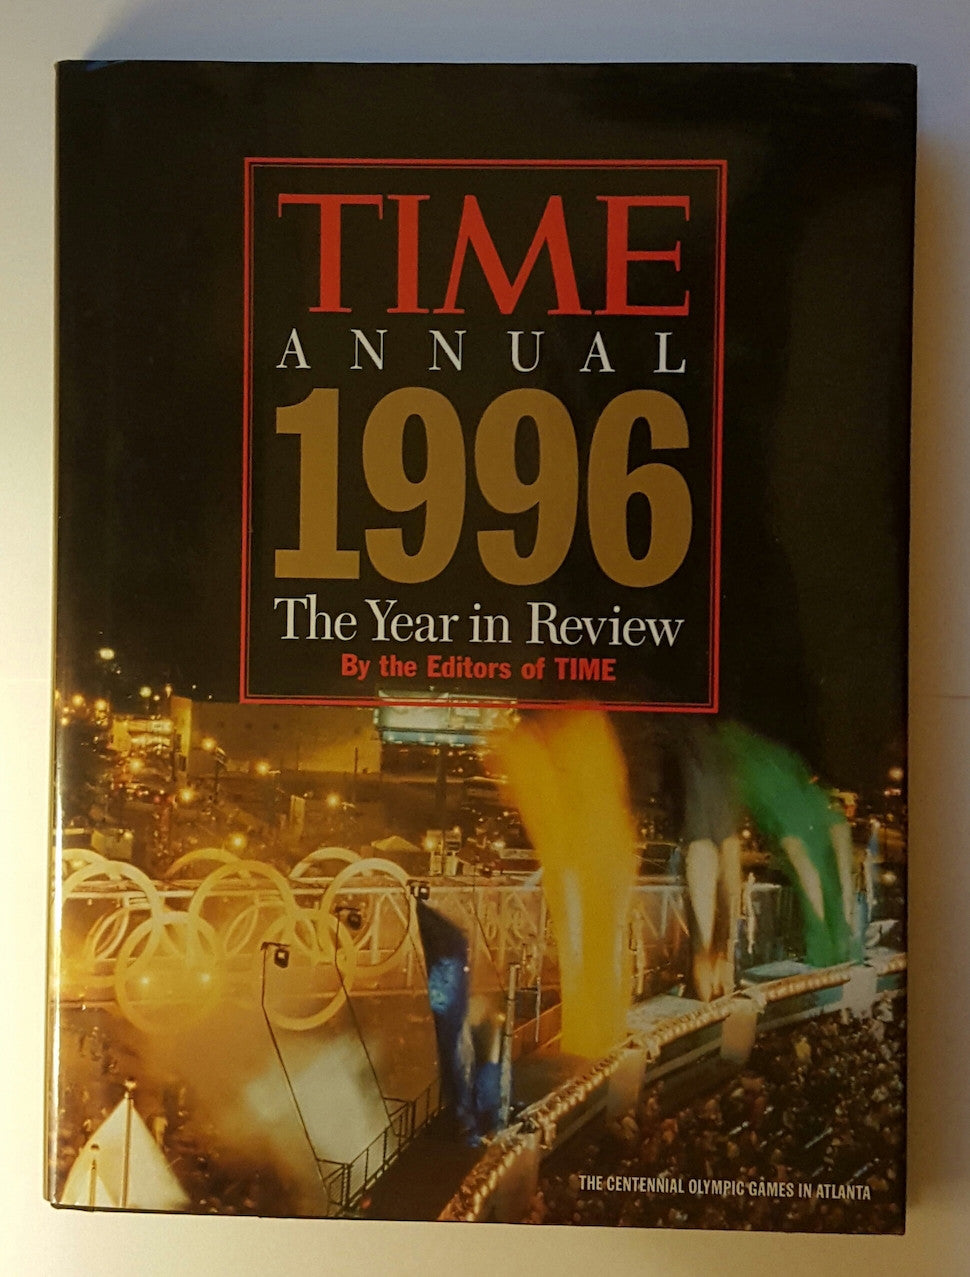 1996 Time Annual 1996 The Year in Review